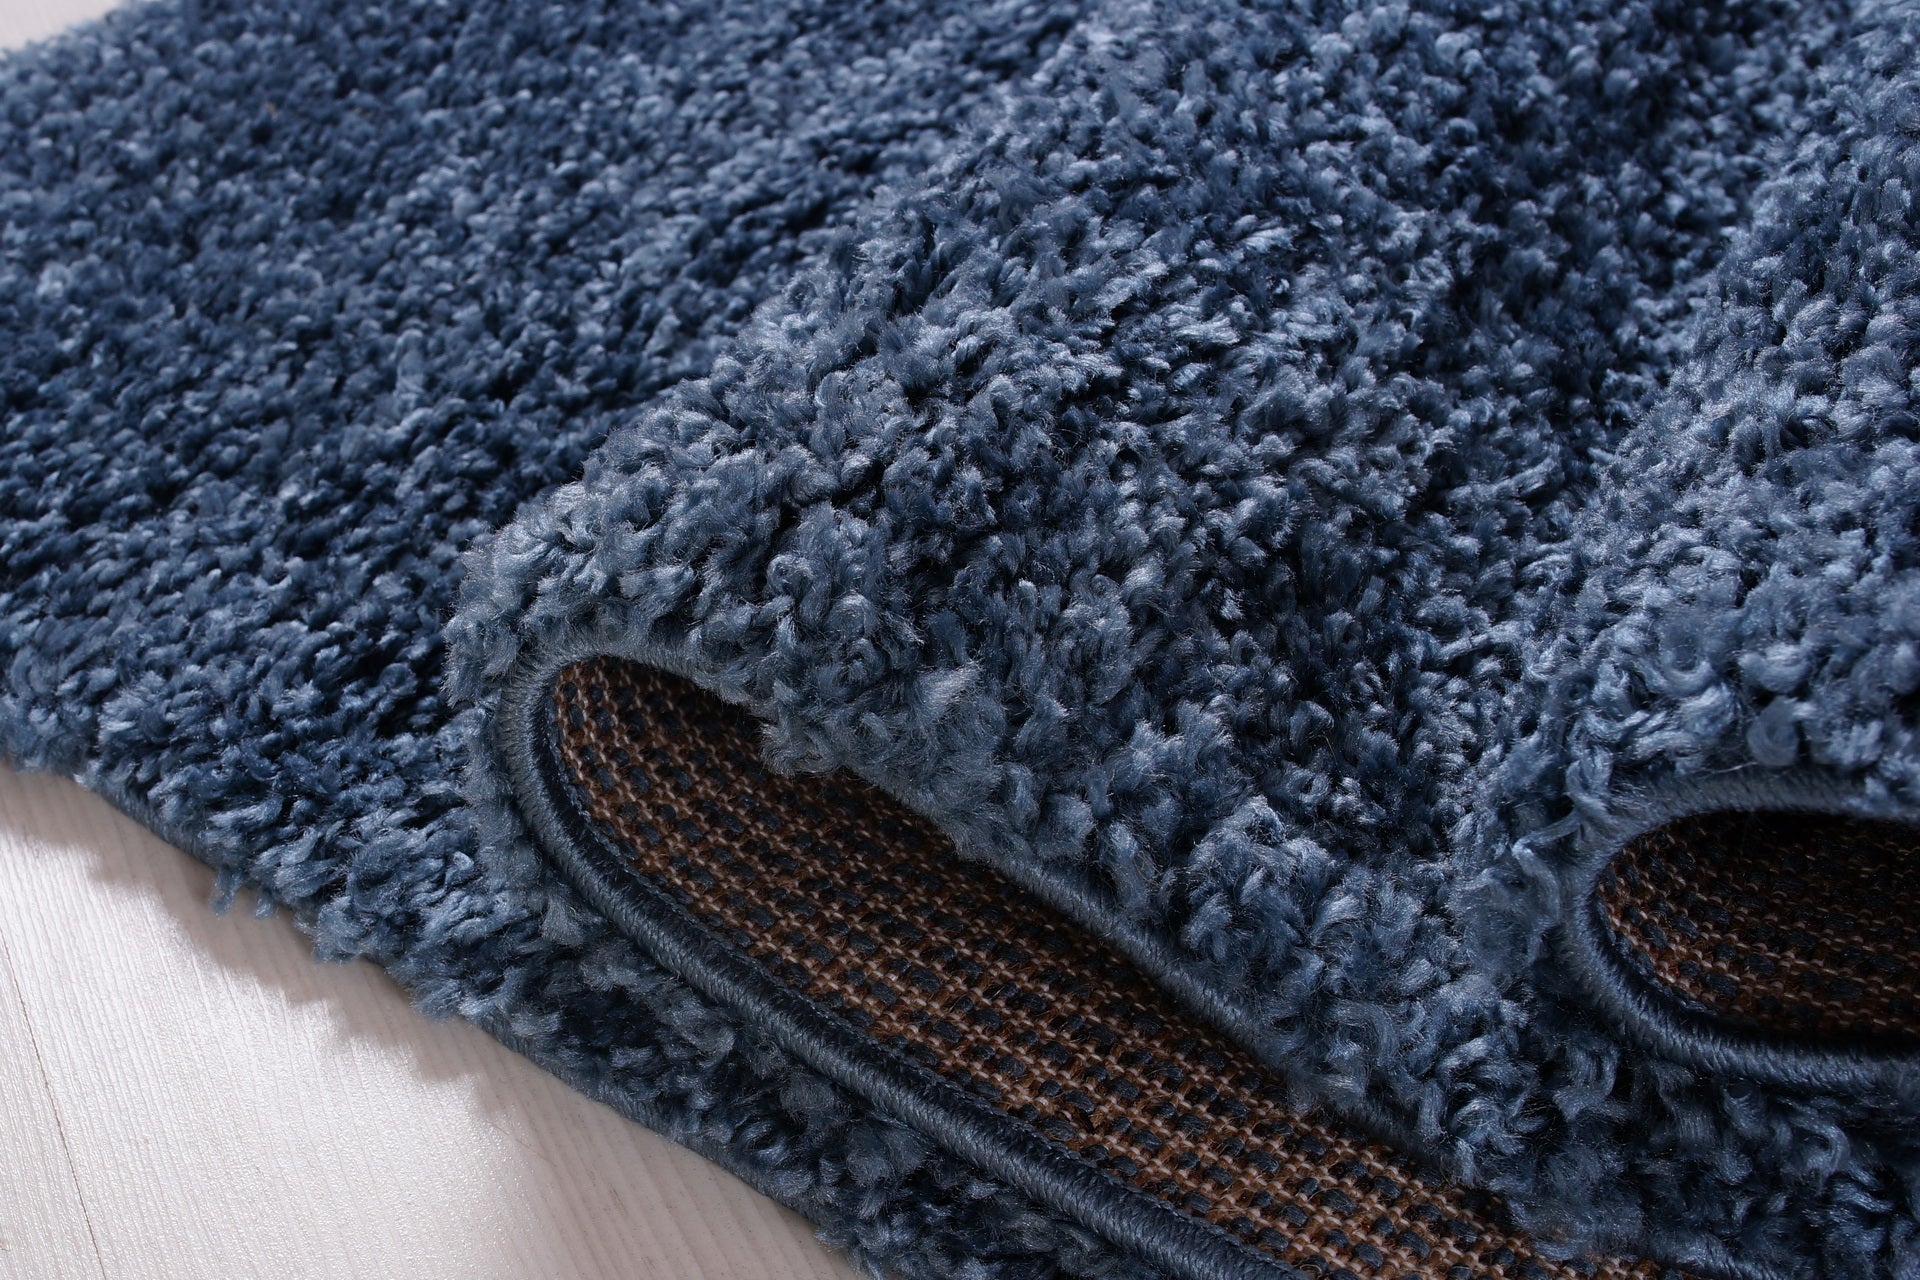 ladole rugs solid color shaggy meknes durable beautiful turkish indoor small mat doormat rug in blue 110 x 211 57cm x 90cm 2x5, 3x5 Runner Rug, Entry Way, Entrance, Balcony, Bedside, Home Office, Table Top